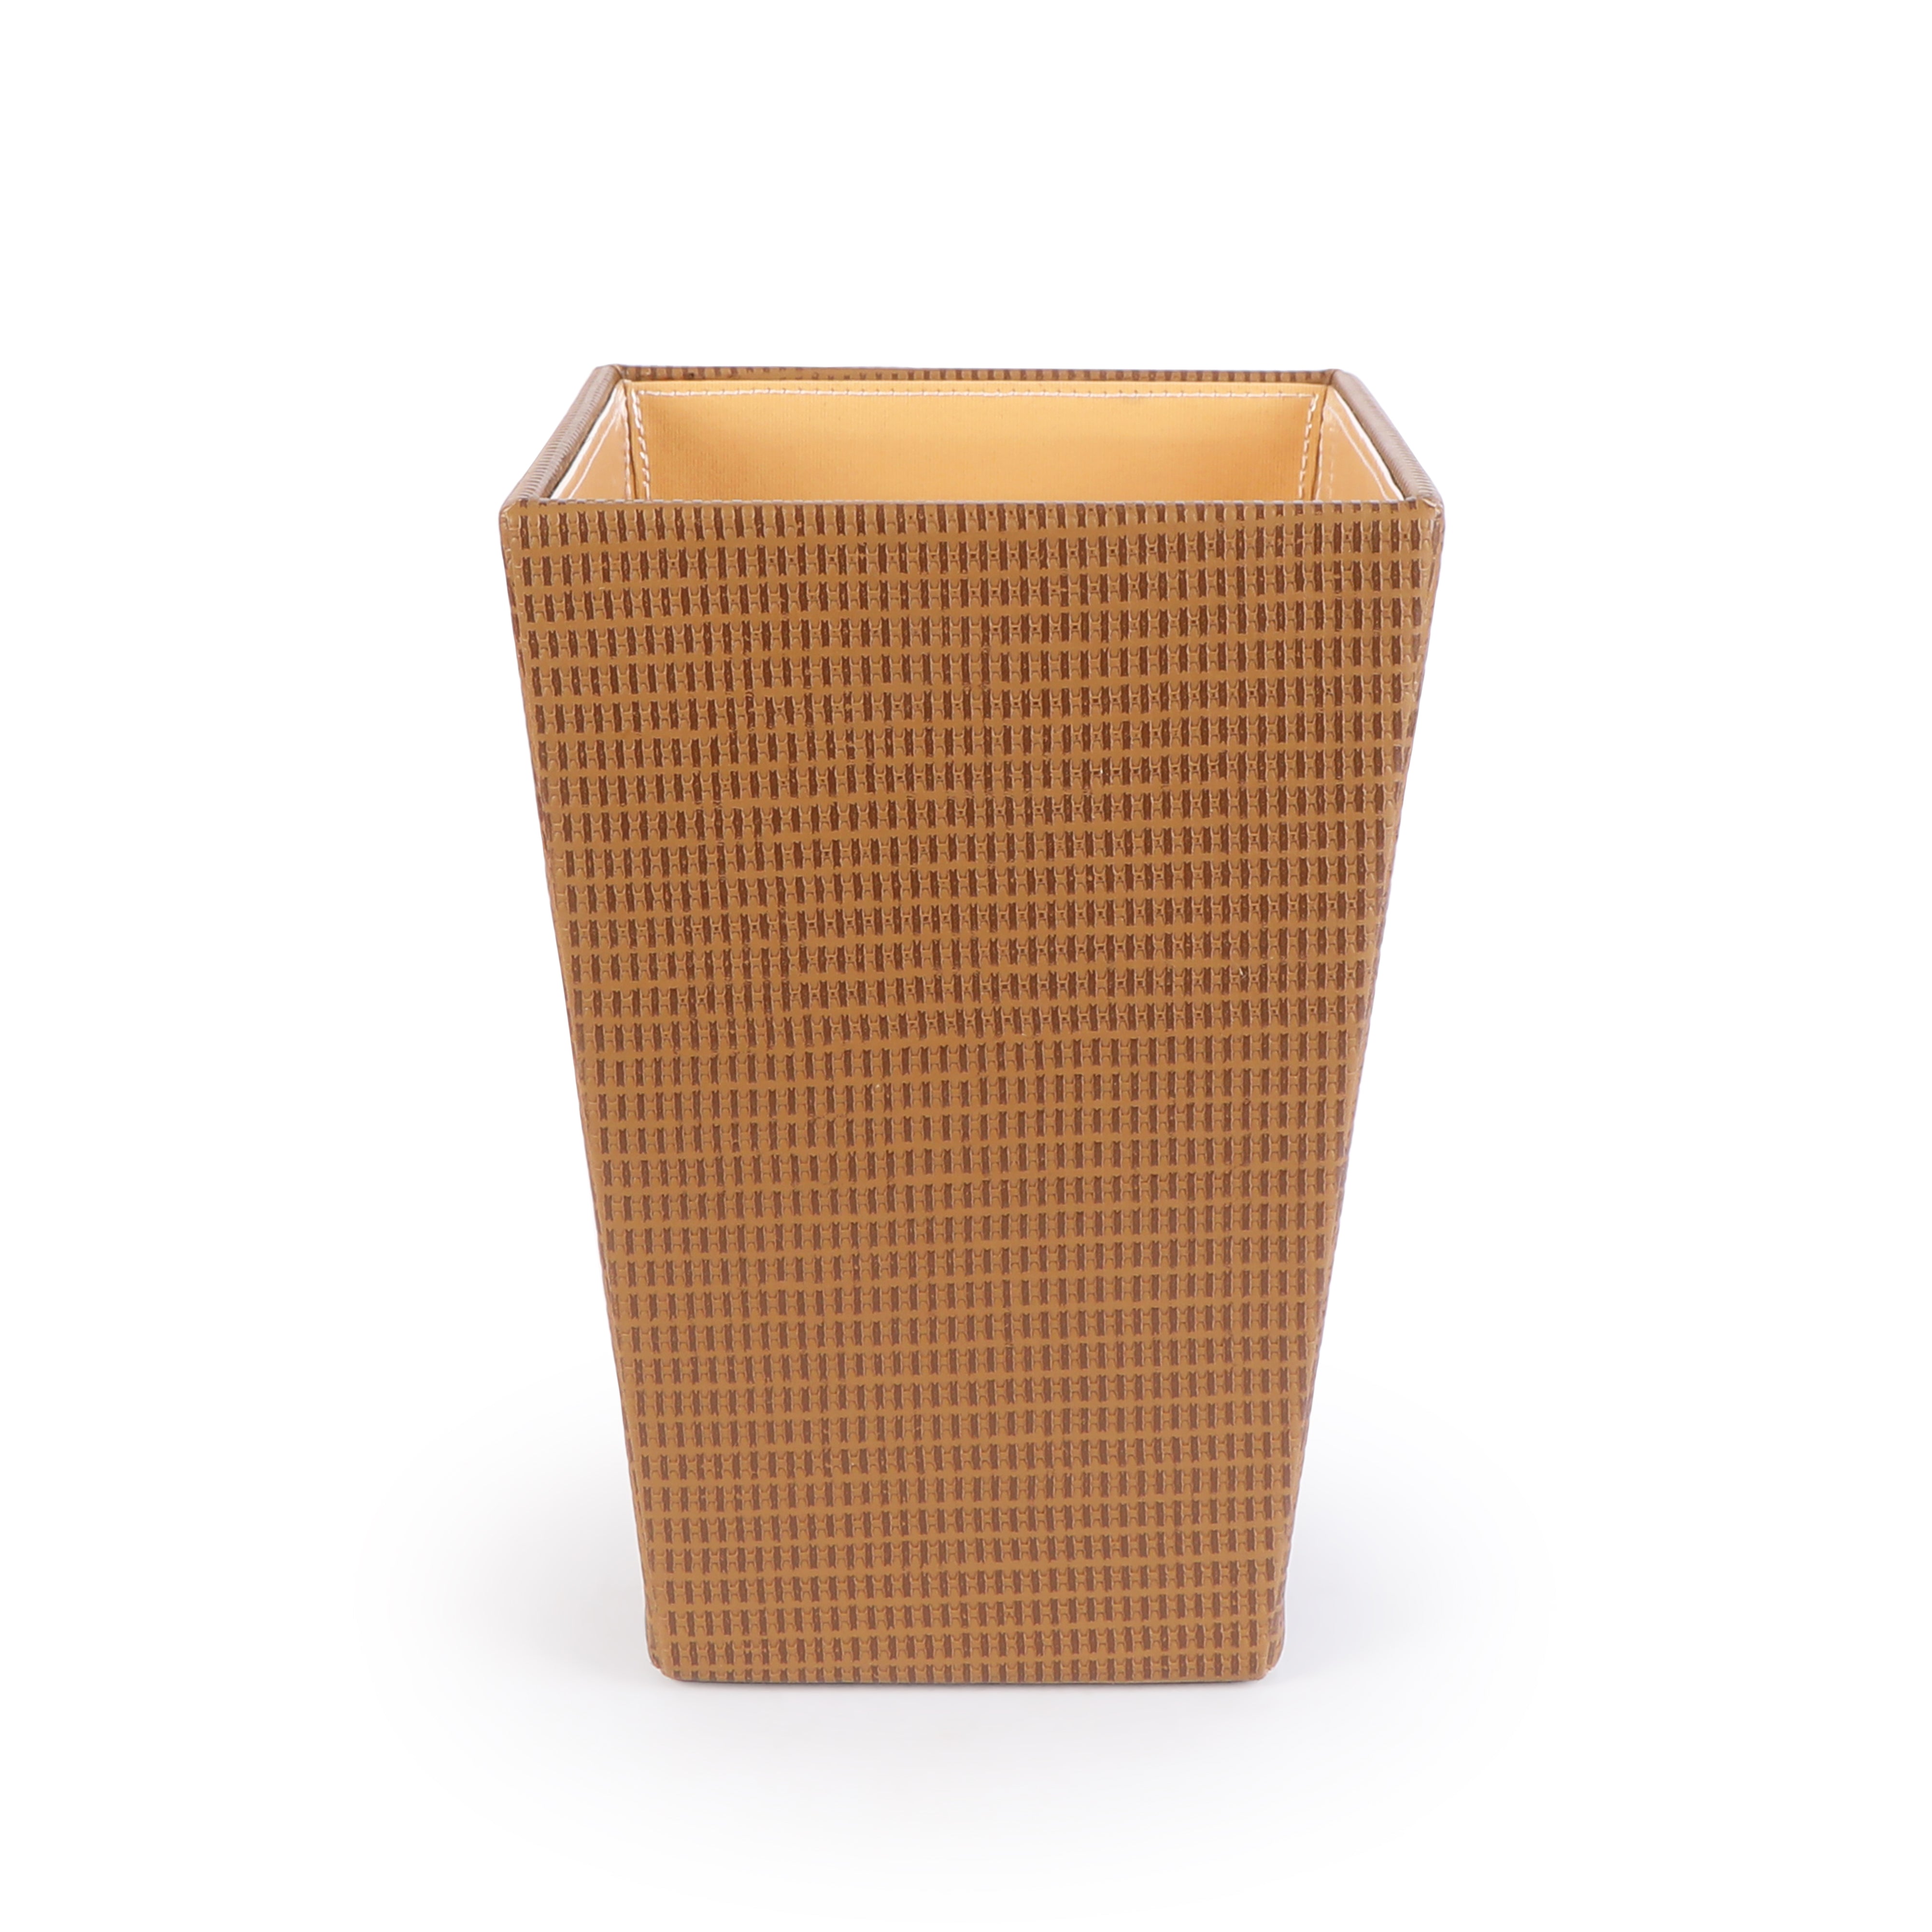 Dustbin - Brown Burberry Leatherette 2- The Home Co.